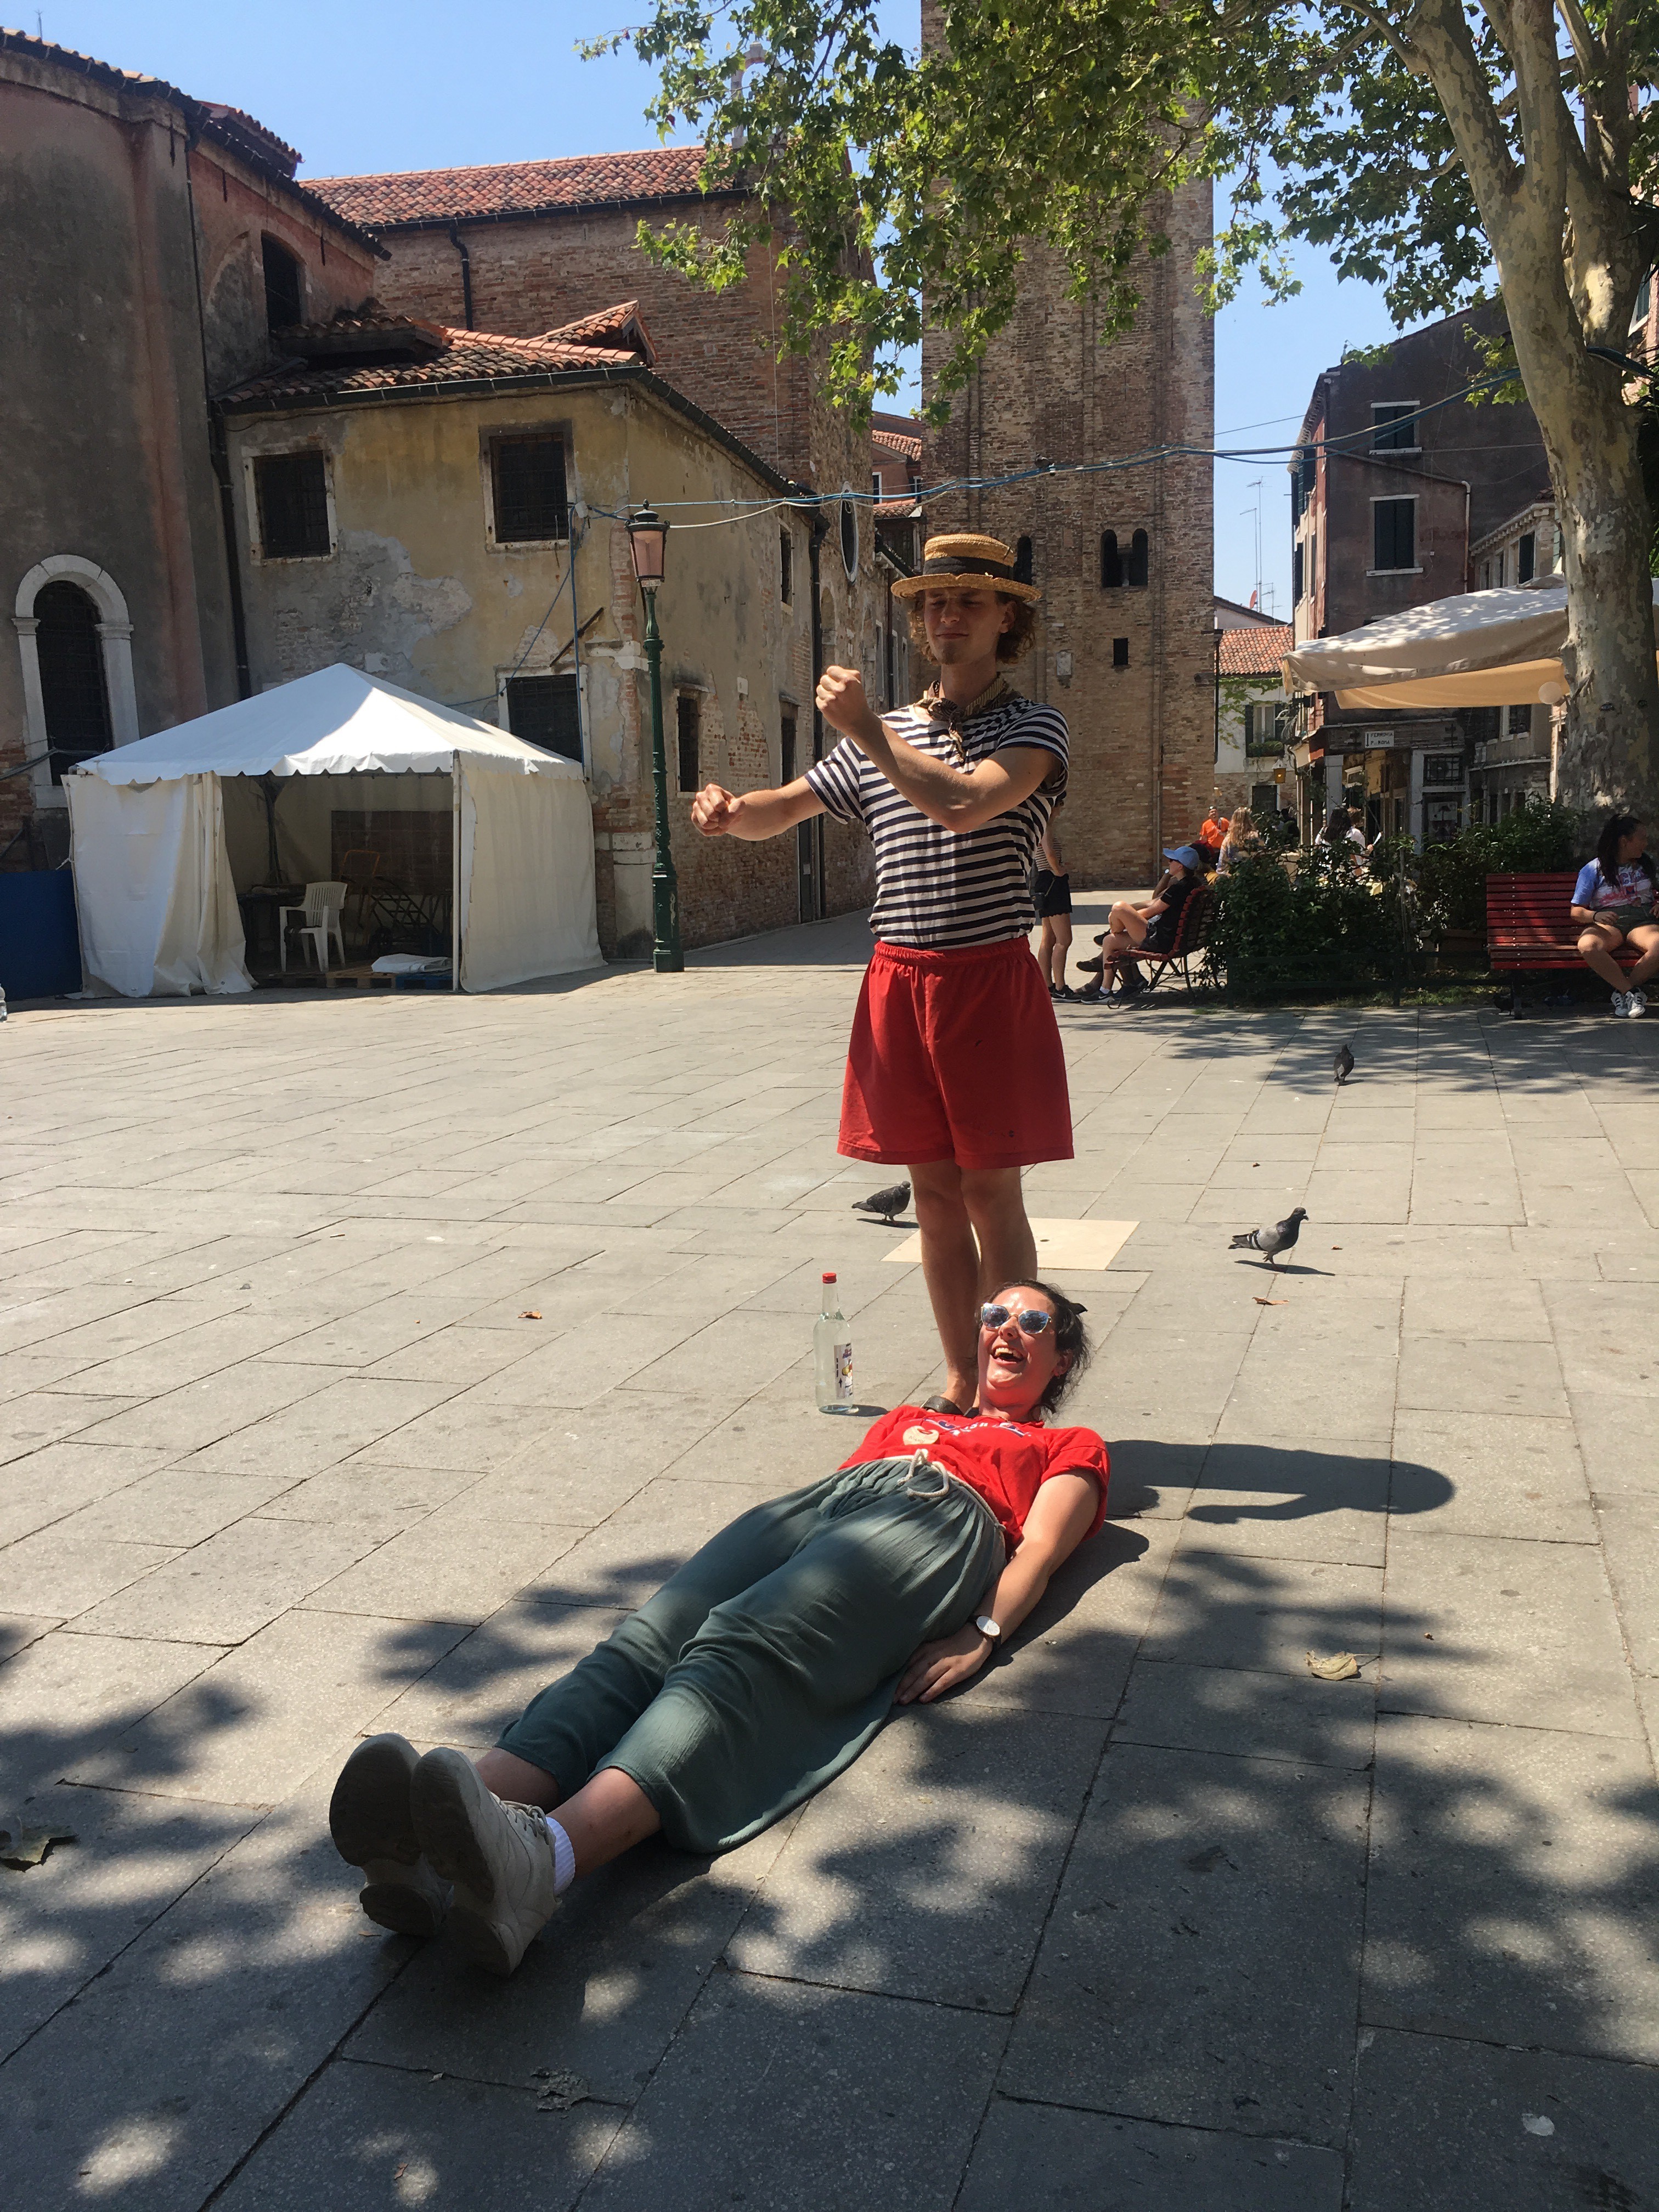 On a street in Venice, a young woman lies on the ground pretending to be a gondola while a gondolier stands over her, pretending to paddle.